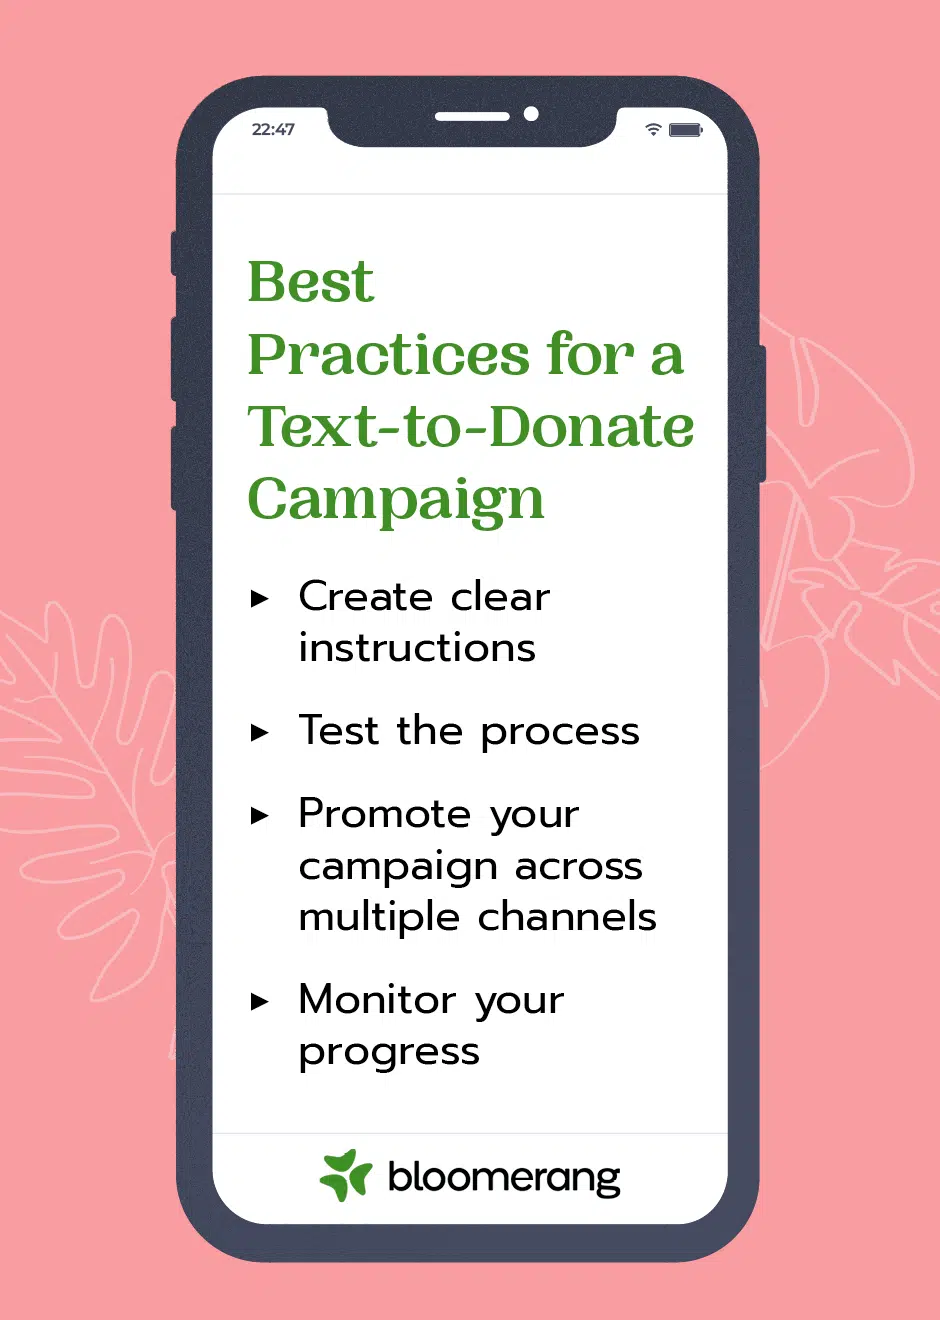 Best practices for a text-to-donate campaign (explained in the text below) 